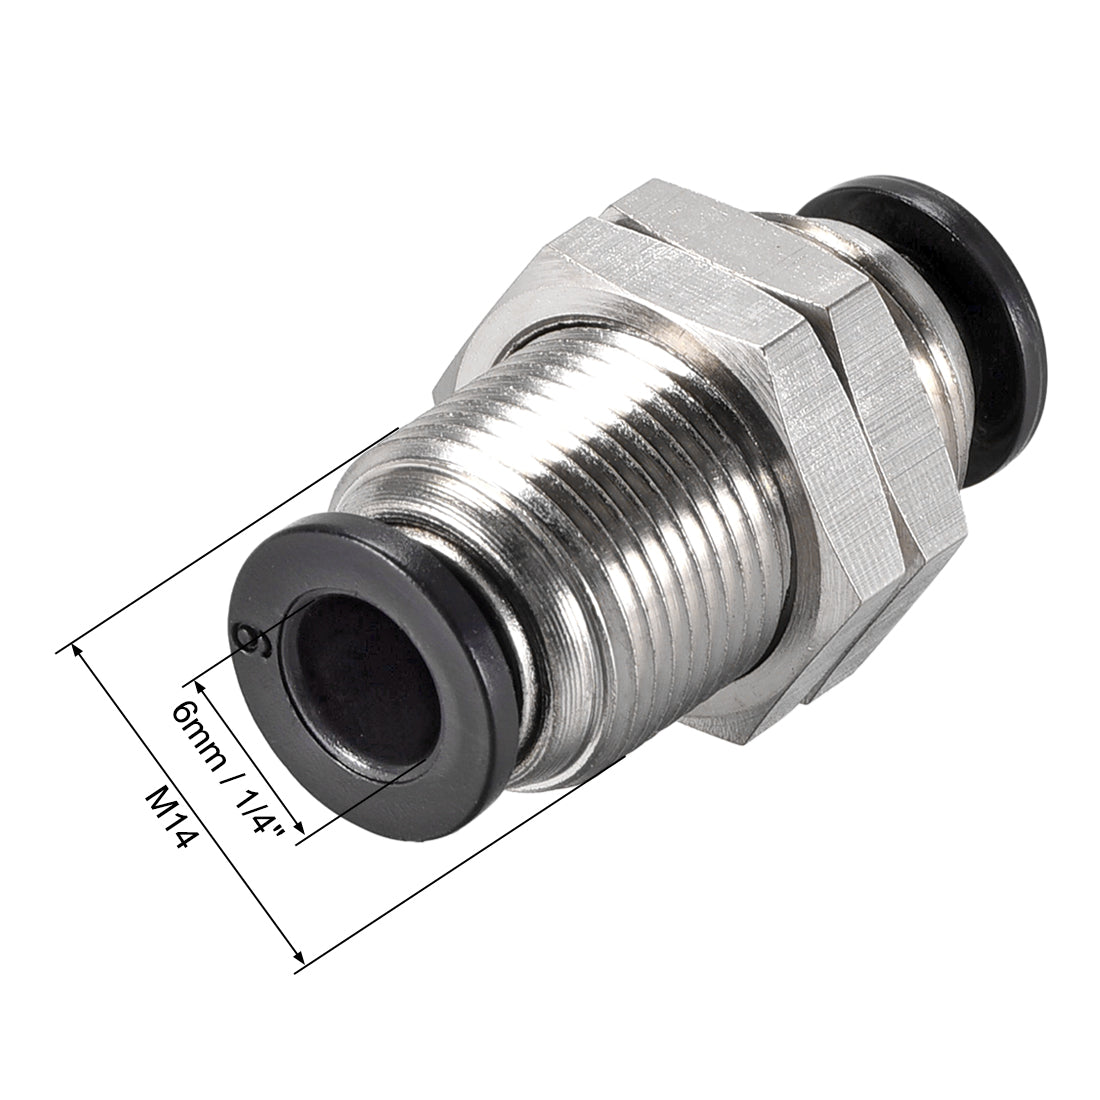 uxcell Uxcell Straight Pneumatic Push to Quick Connect Fittings Bulkhead Union 6mm Tube OD X 6mm Tube OD 2pcs